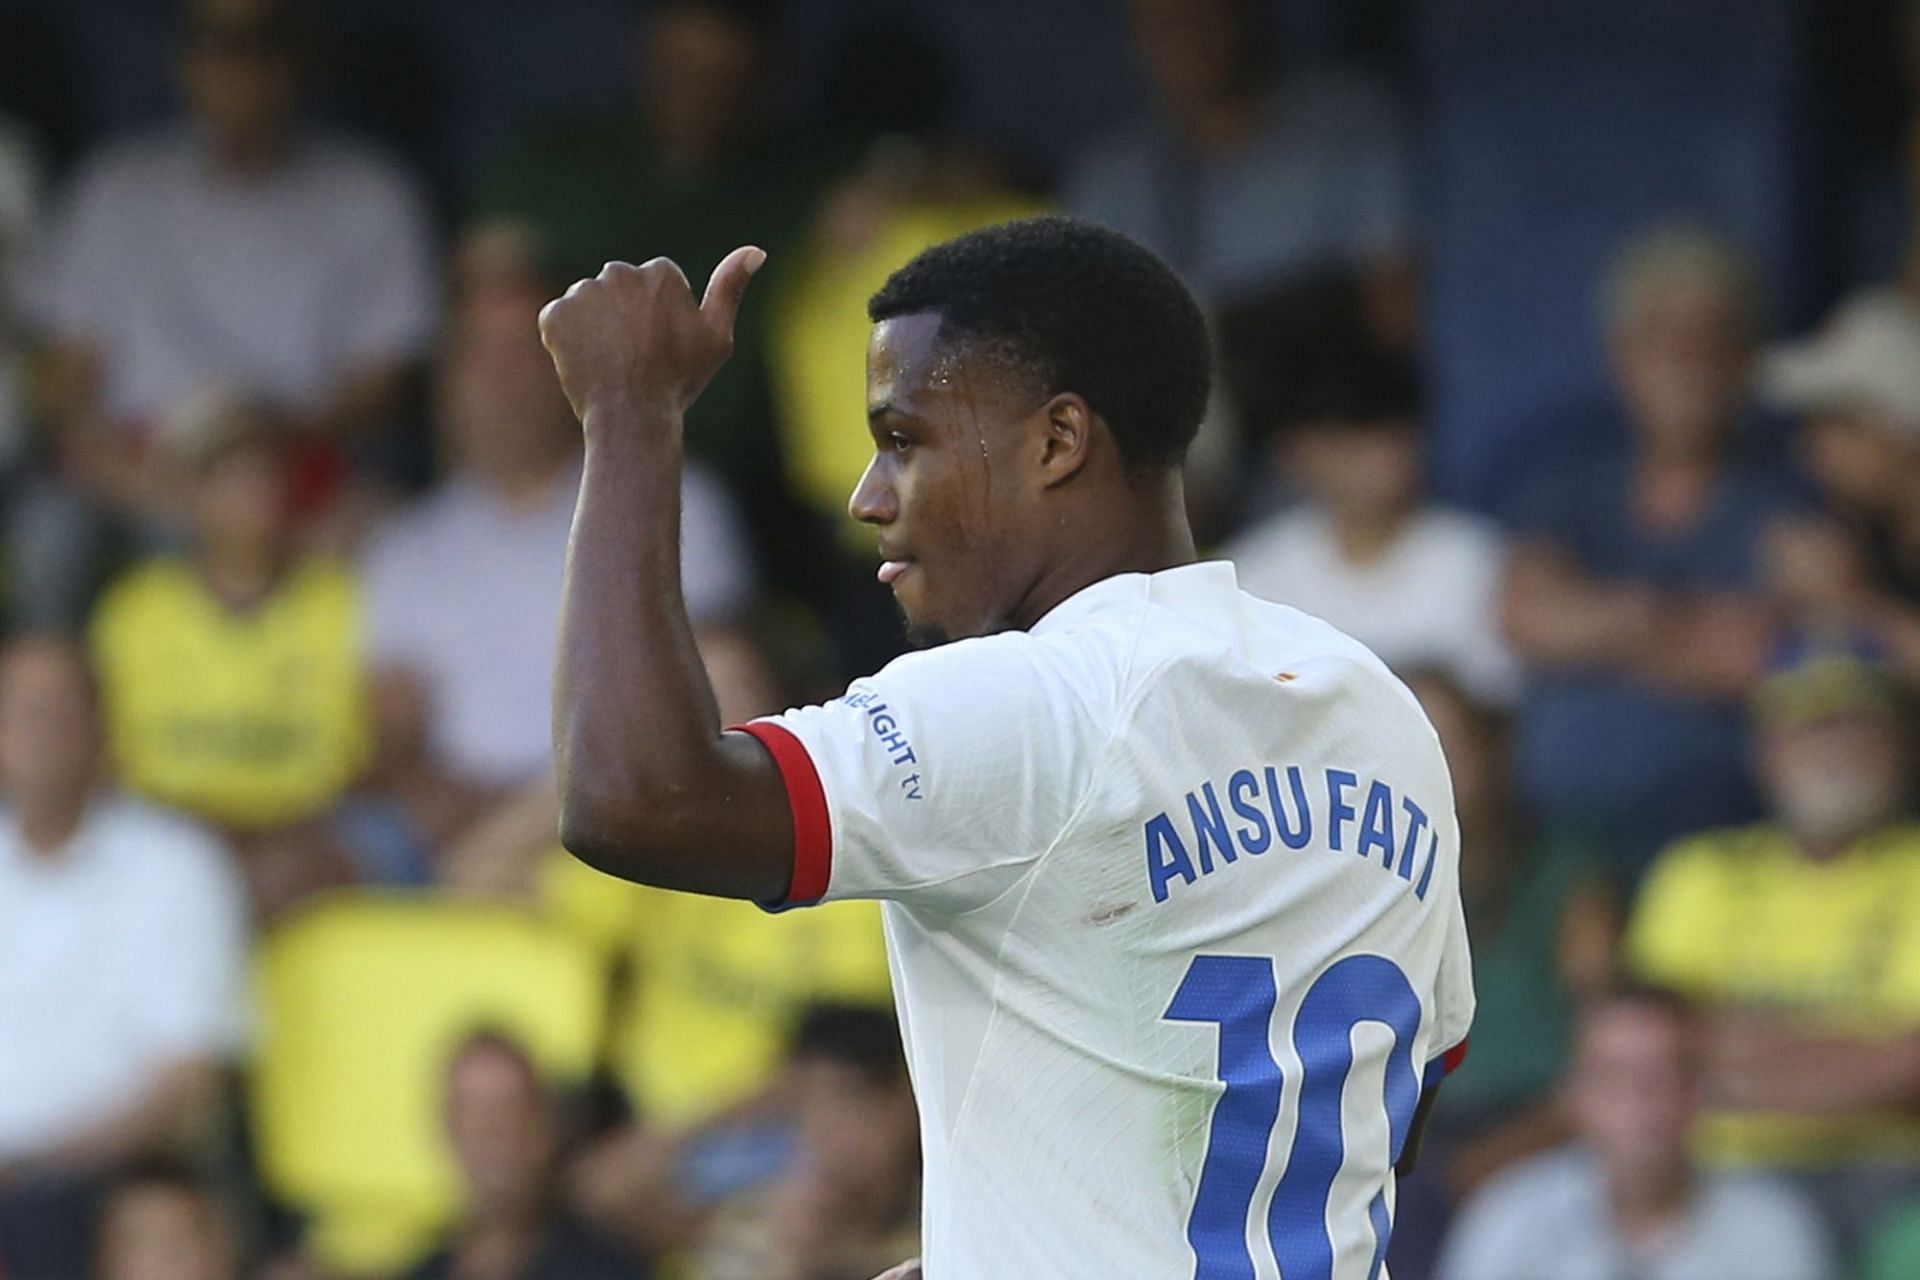 Ansu Fati moved to the Amex this summer on loan.